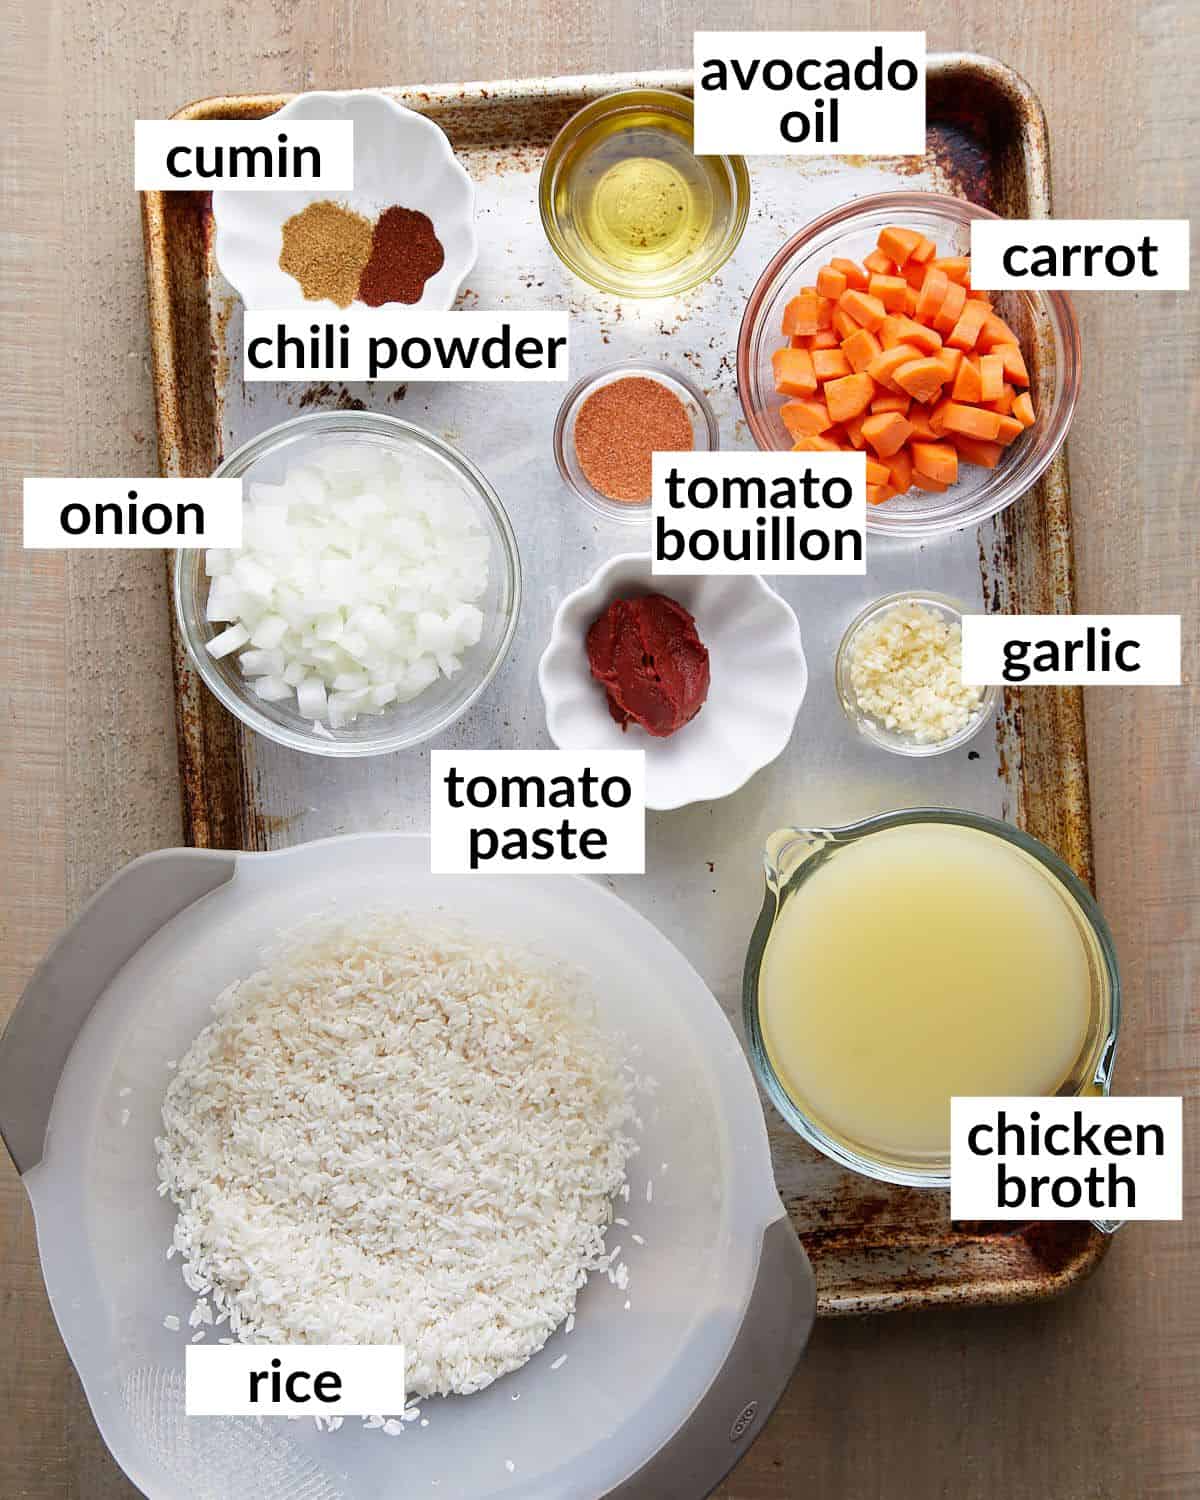 Overhead image of ingredients needed for Mexican red rice.